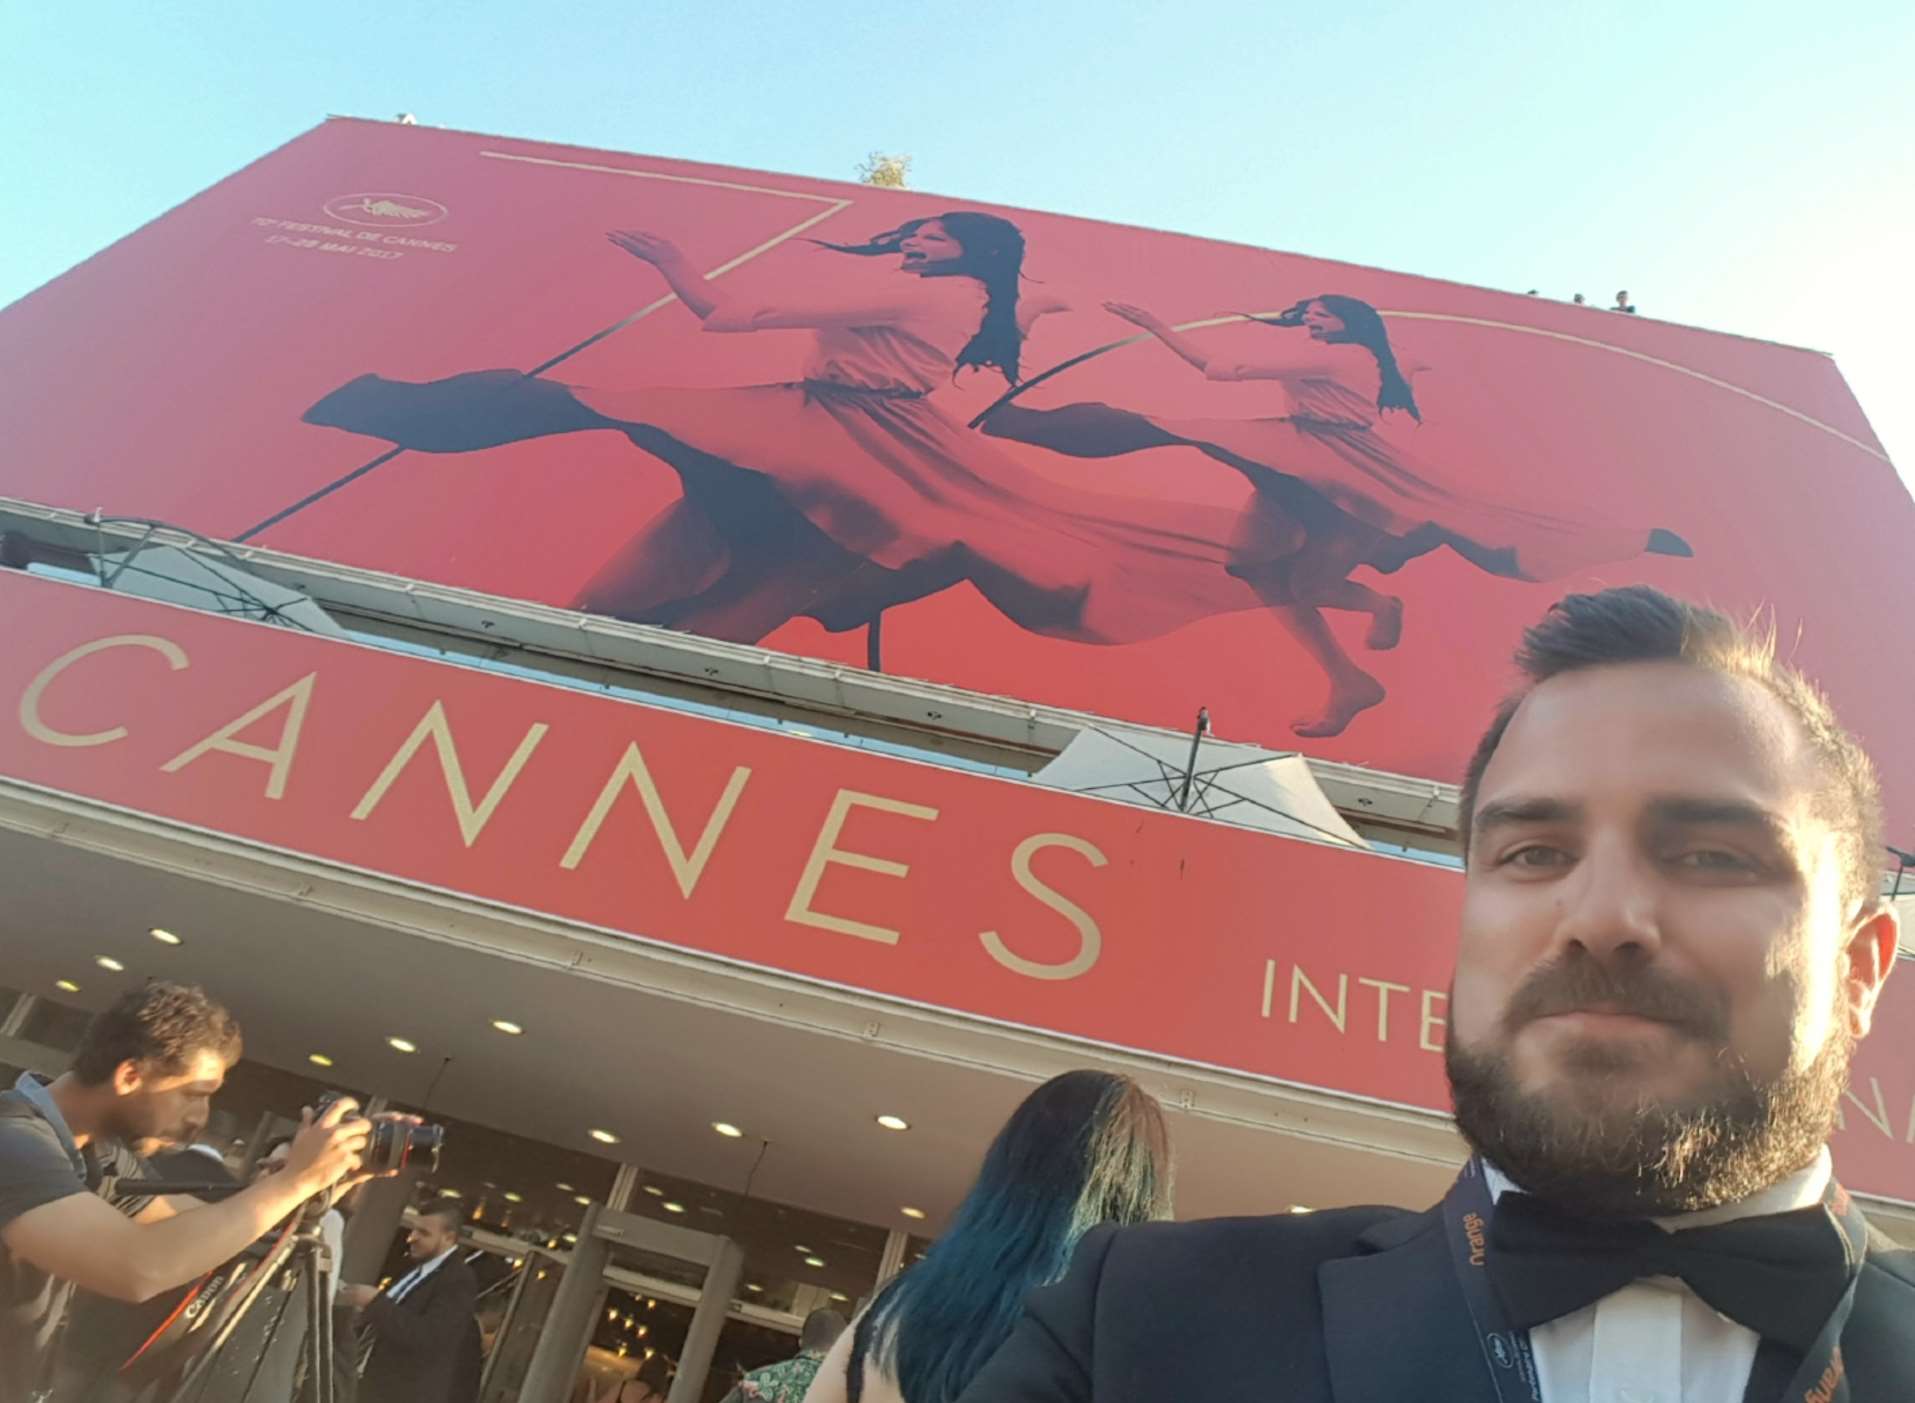 Folkestone filmmaker Ben Barton says being at Cannes for the premiere of his new film was a "crazy, unreal experience"